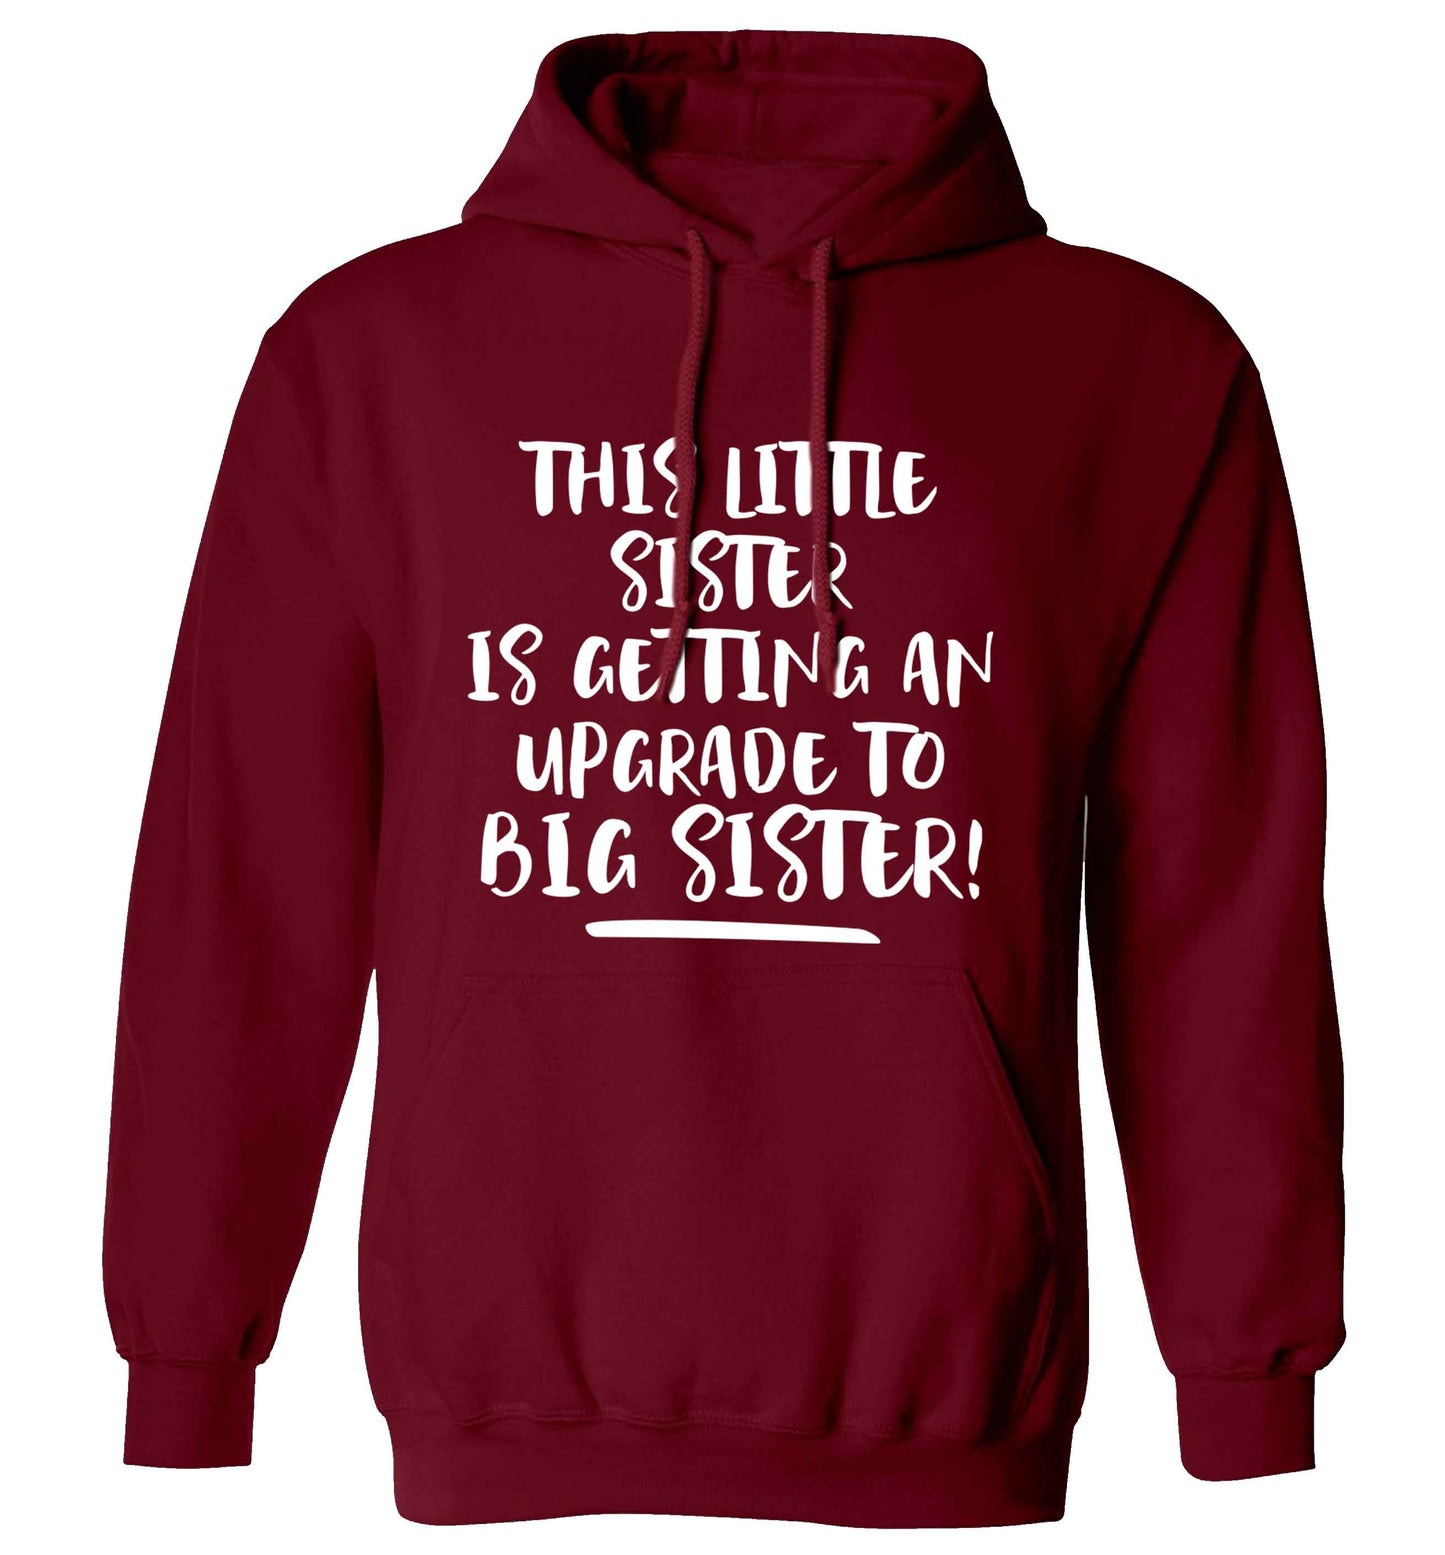 This little sister is getting an upgrade to big sister! adults unisex maroon hoodie 2XL